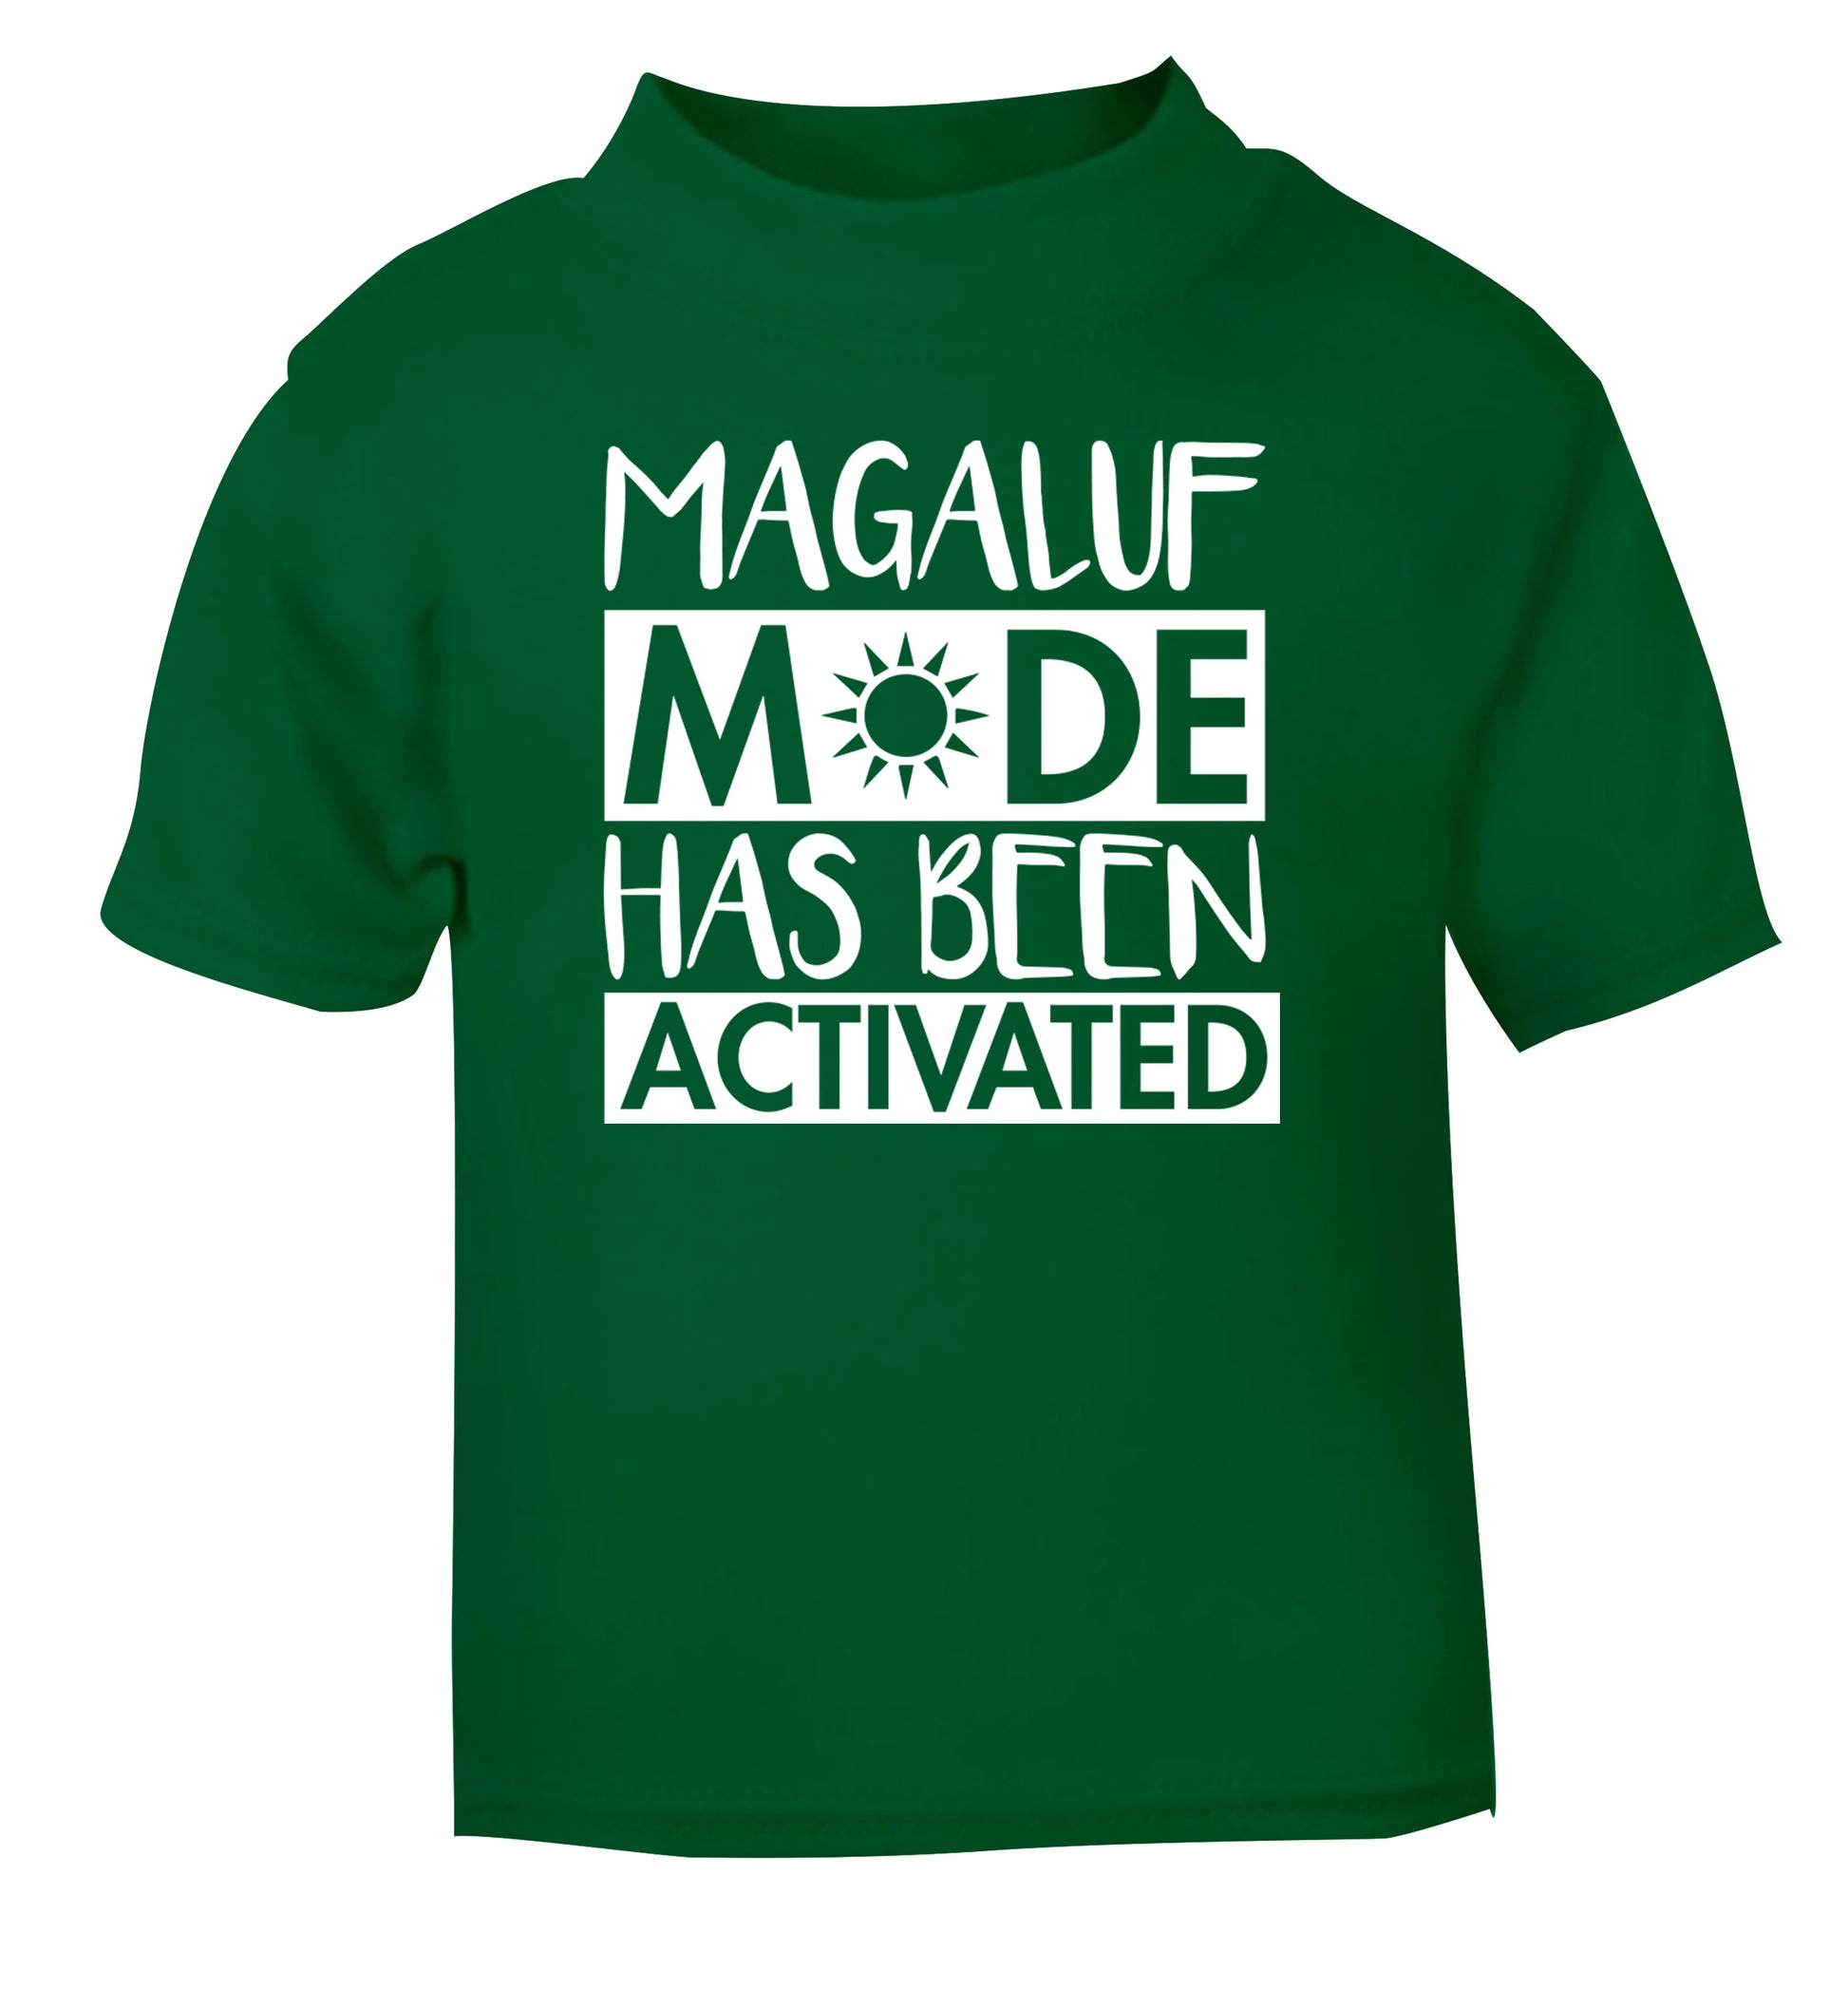 Magaluf mode has been activated green Baby Toddler Tshirt 2 Years